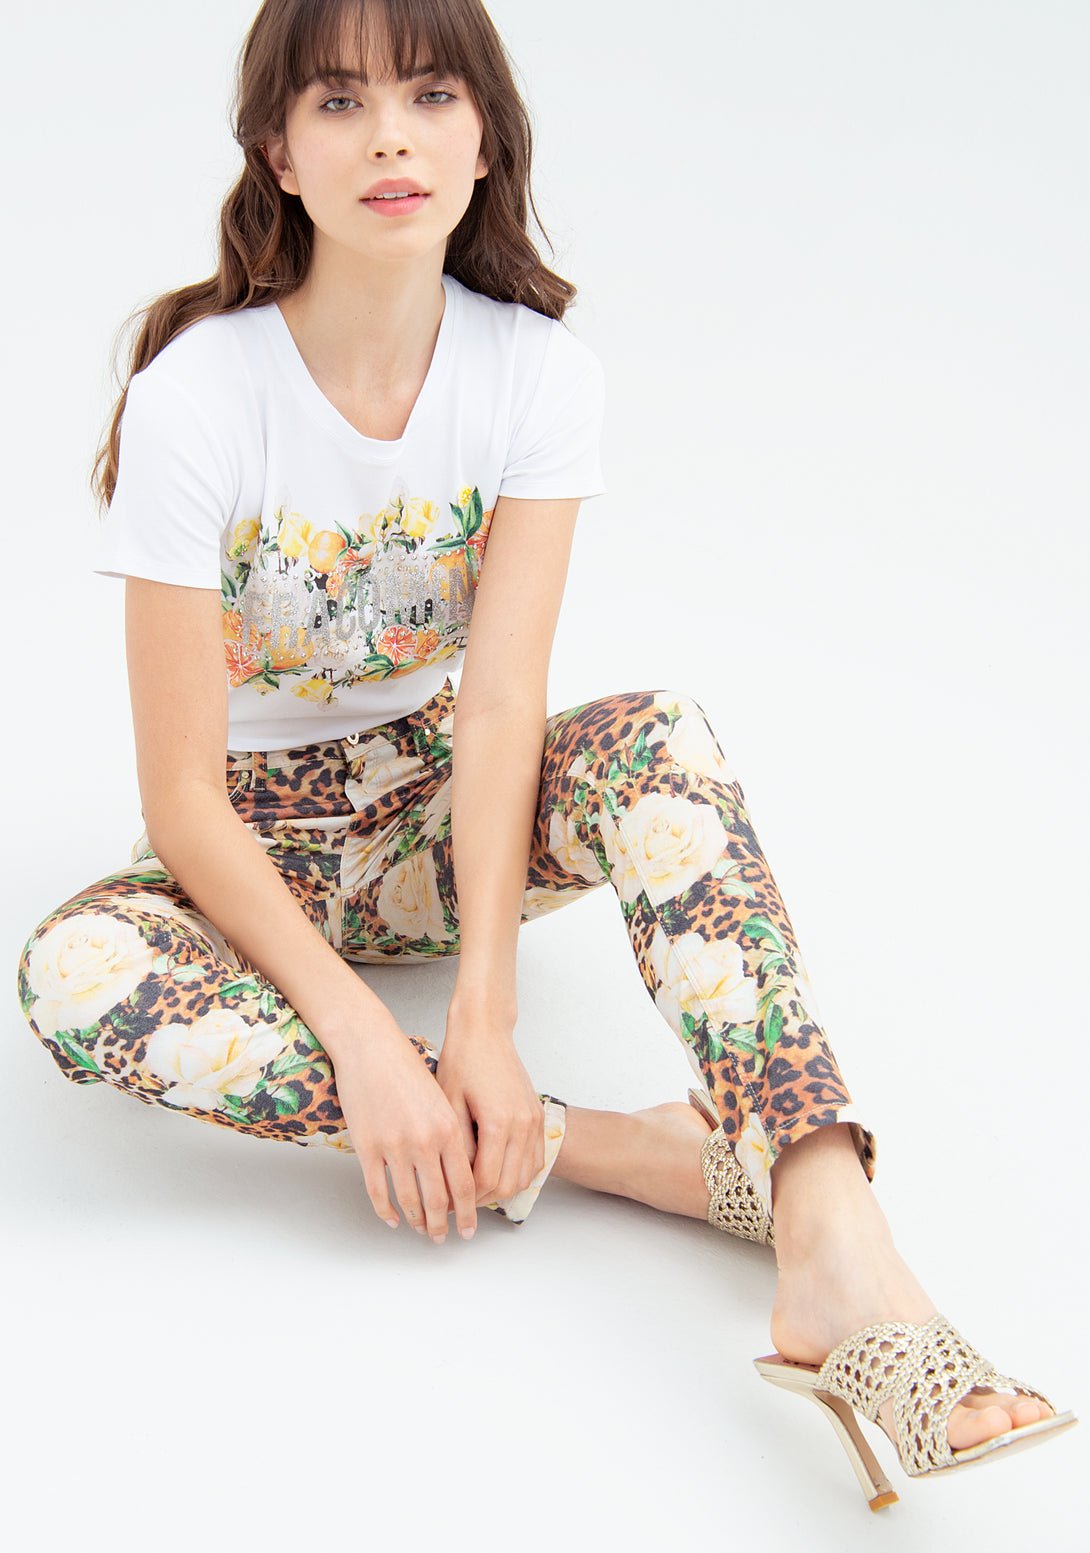 Pant skinny fit with flowery and animalier multicolor pattern